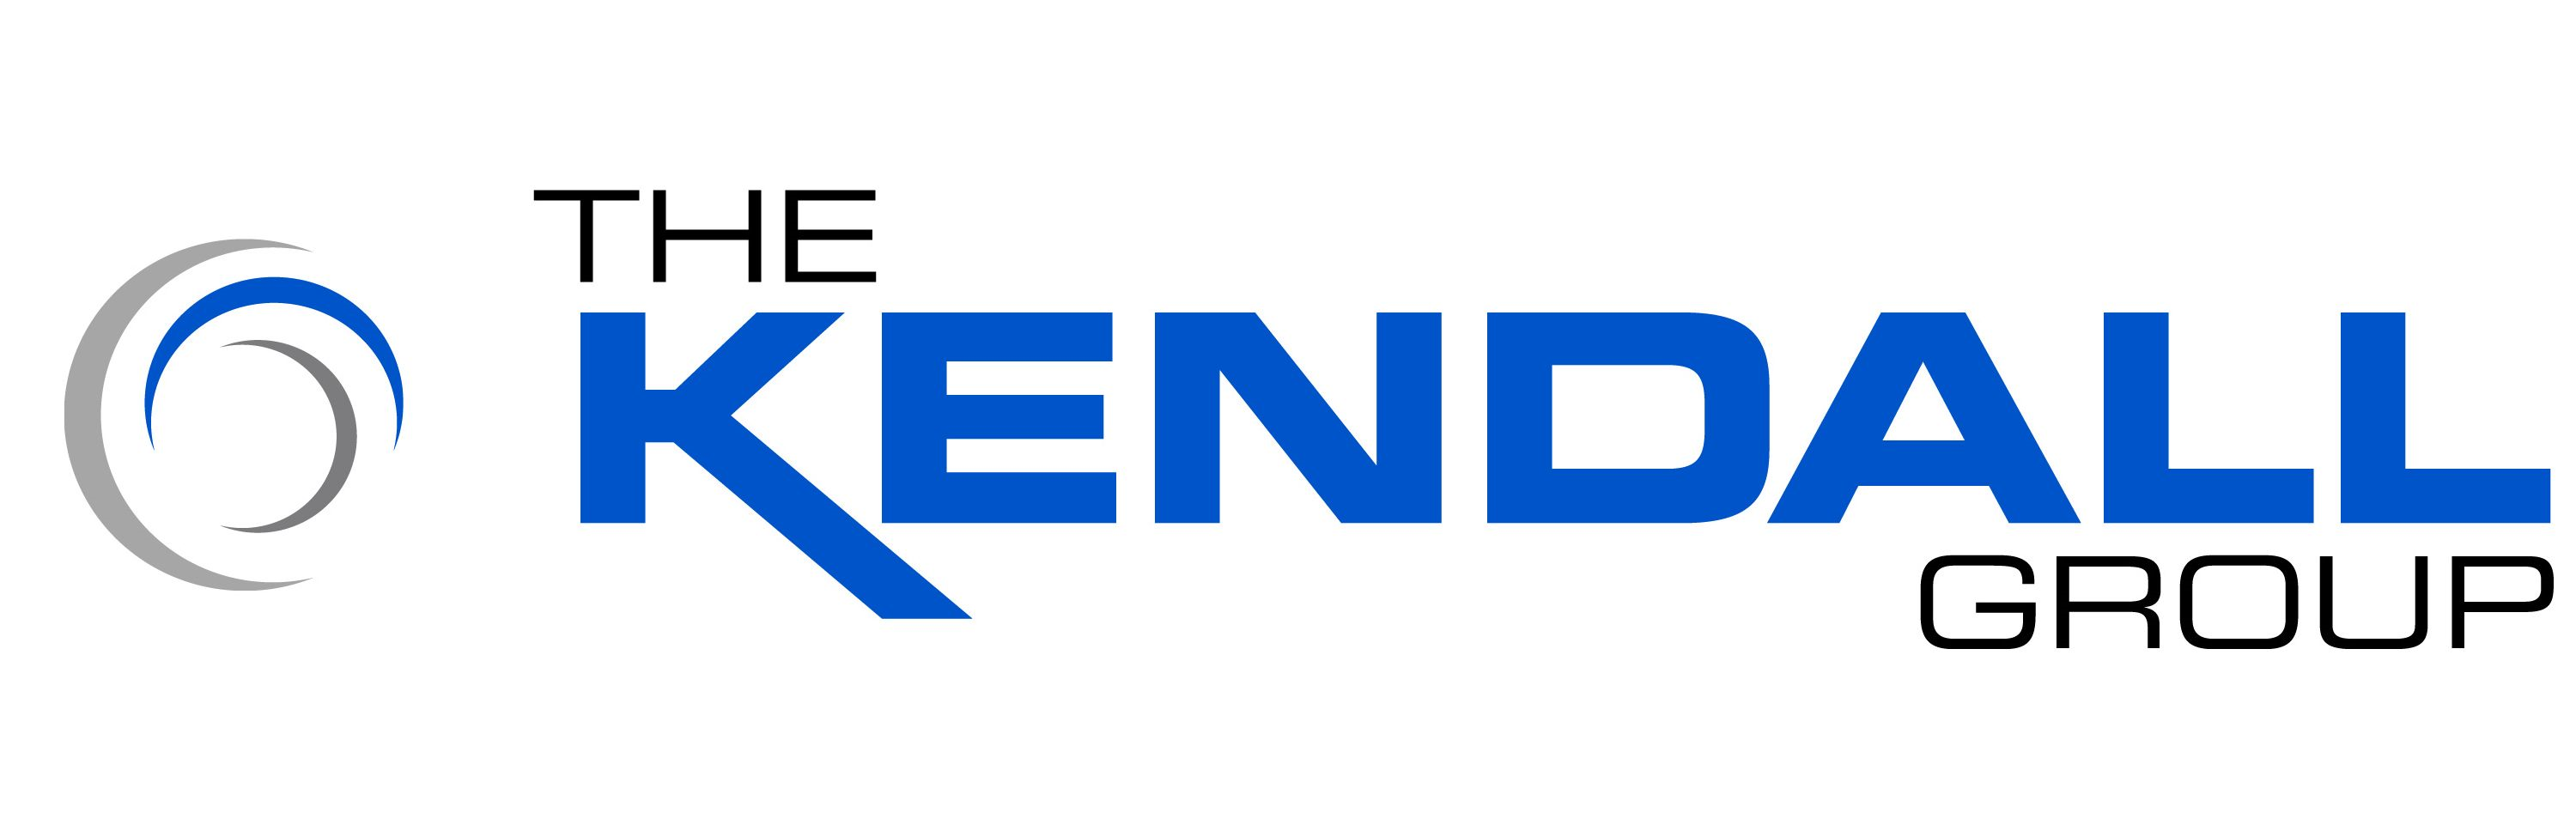 The Kendall Group Company Logo